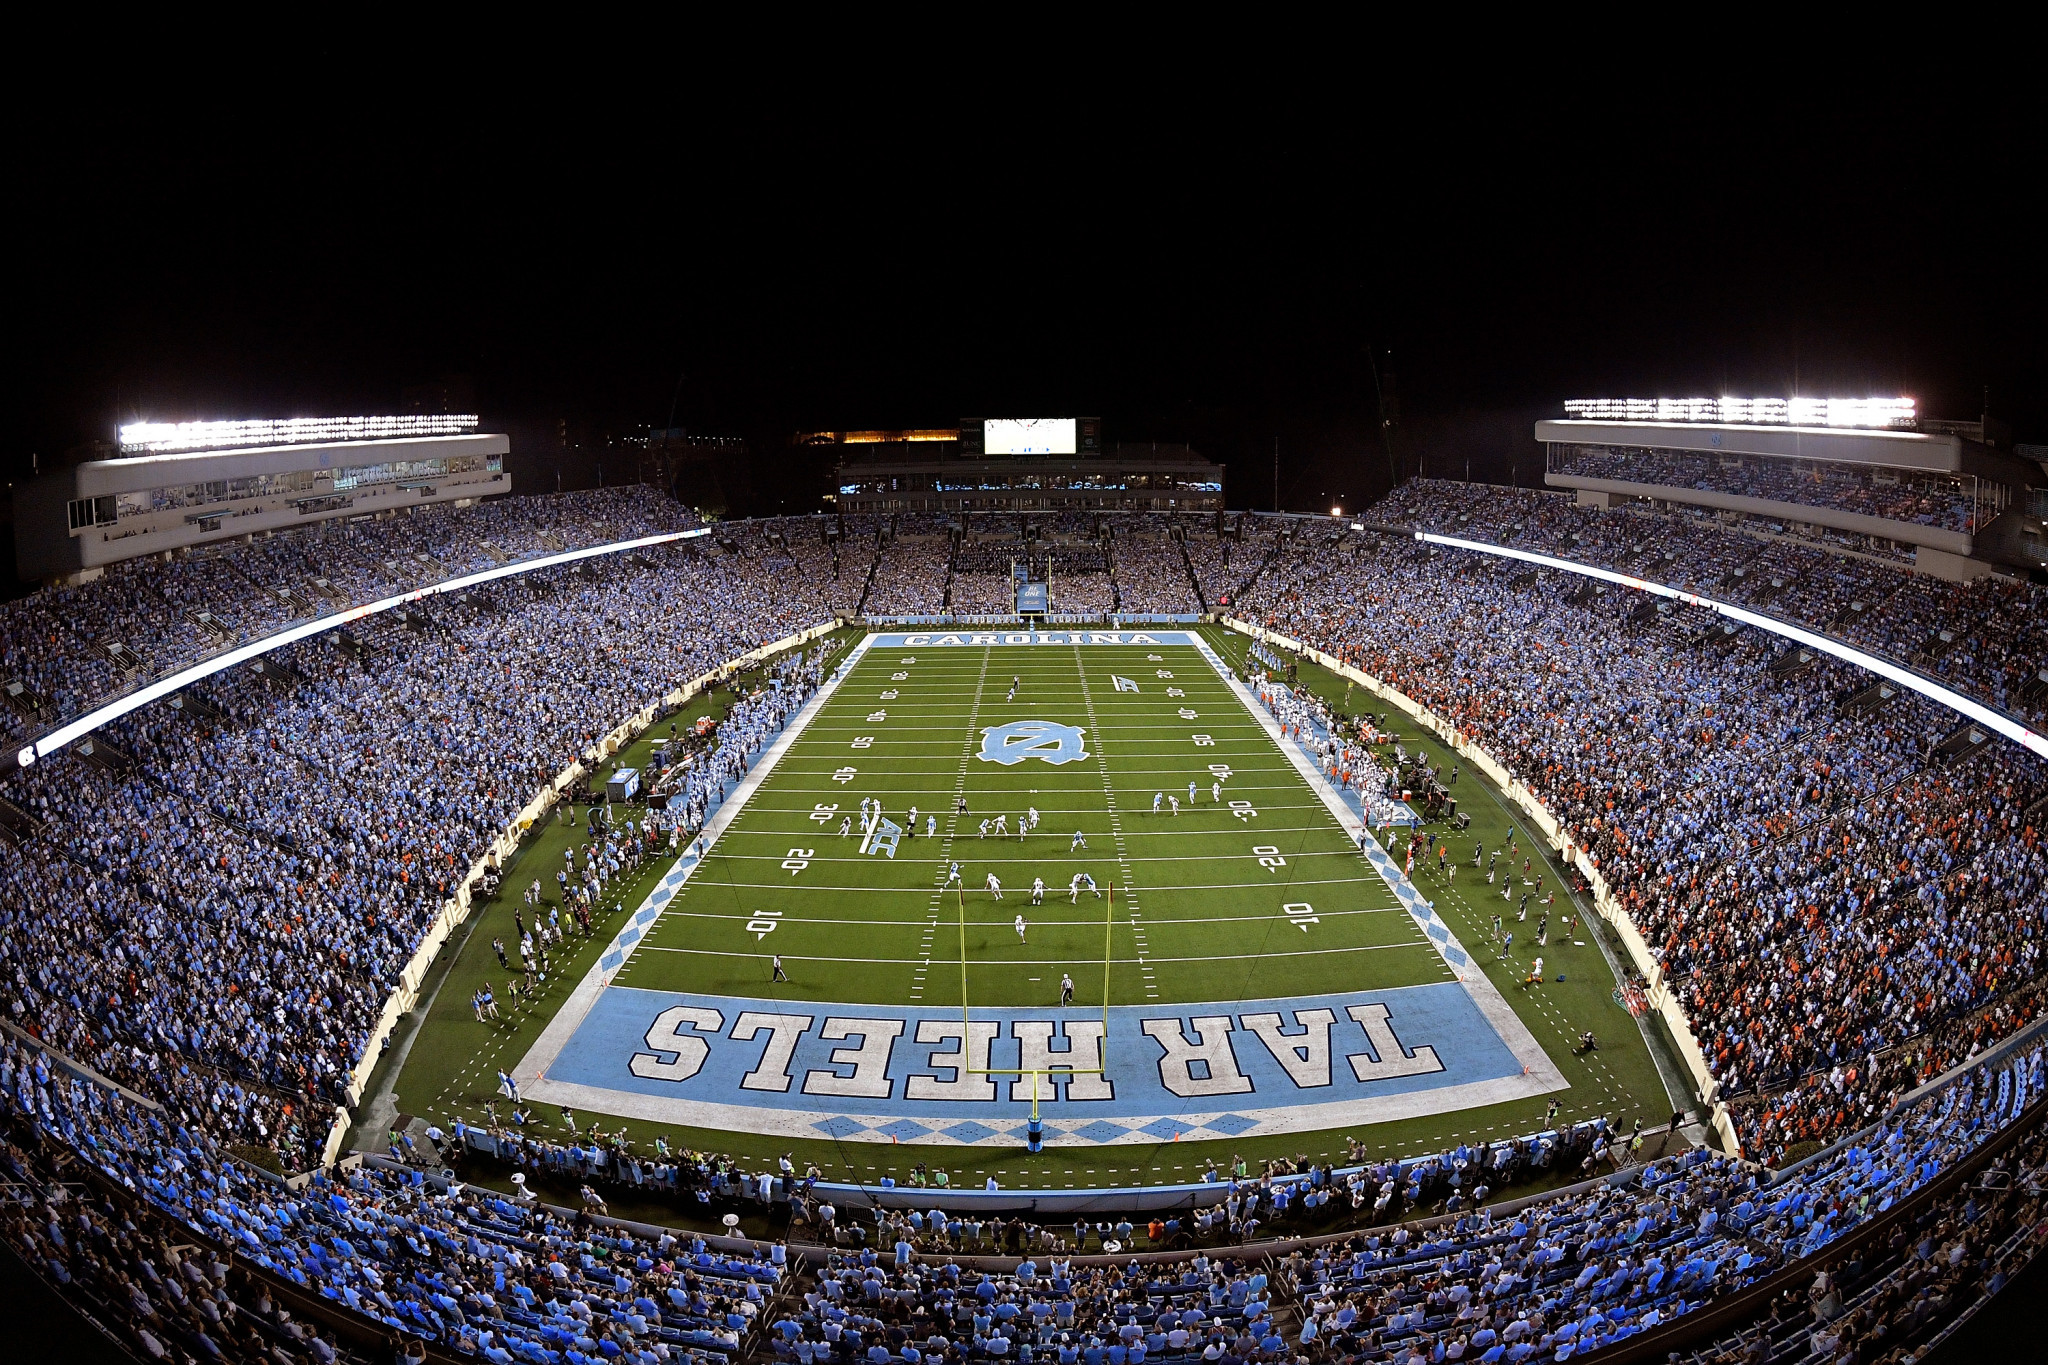 North Carolina's unsuccessful bid was focused on existing venues such as Kenan Stadium in Chapel Hill ©Getty Images